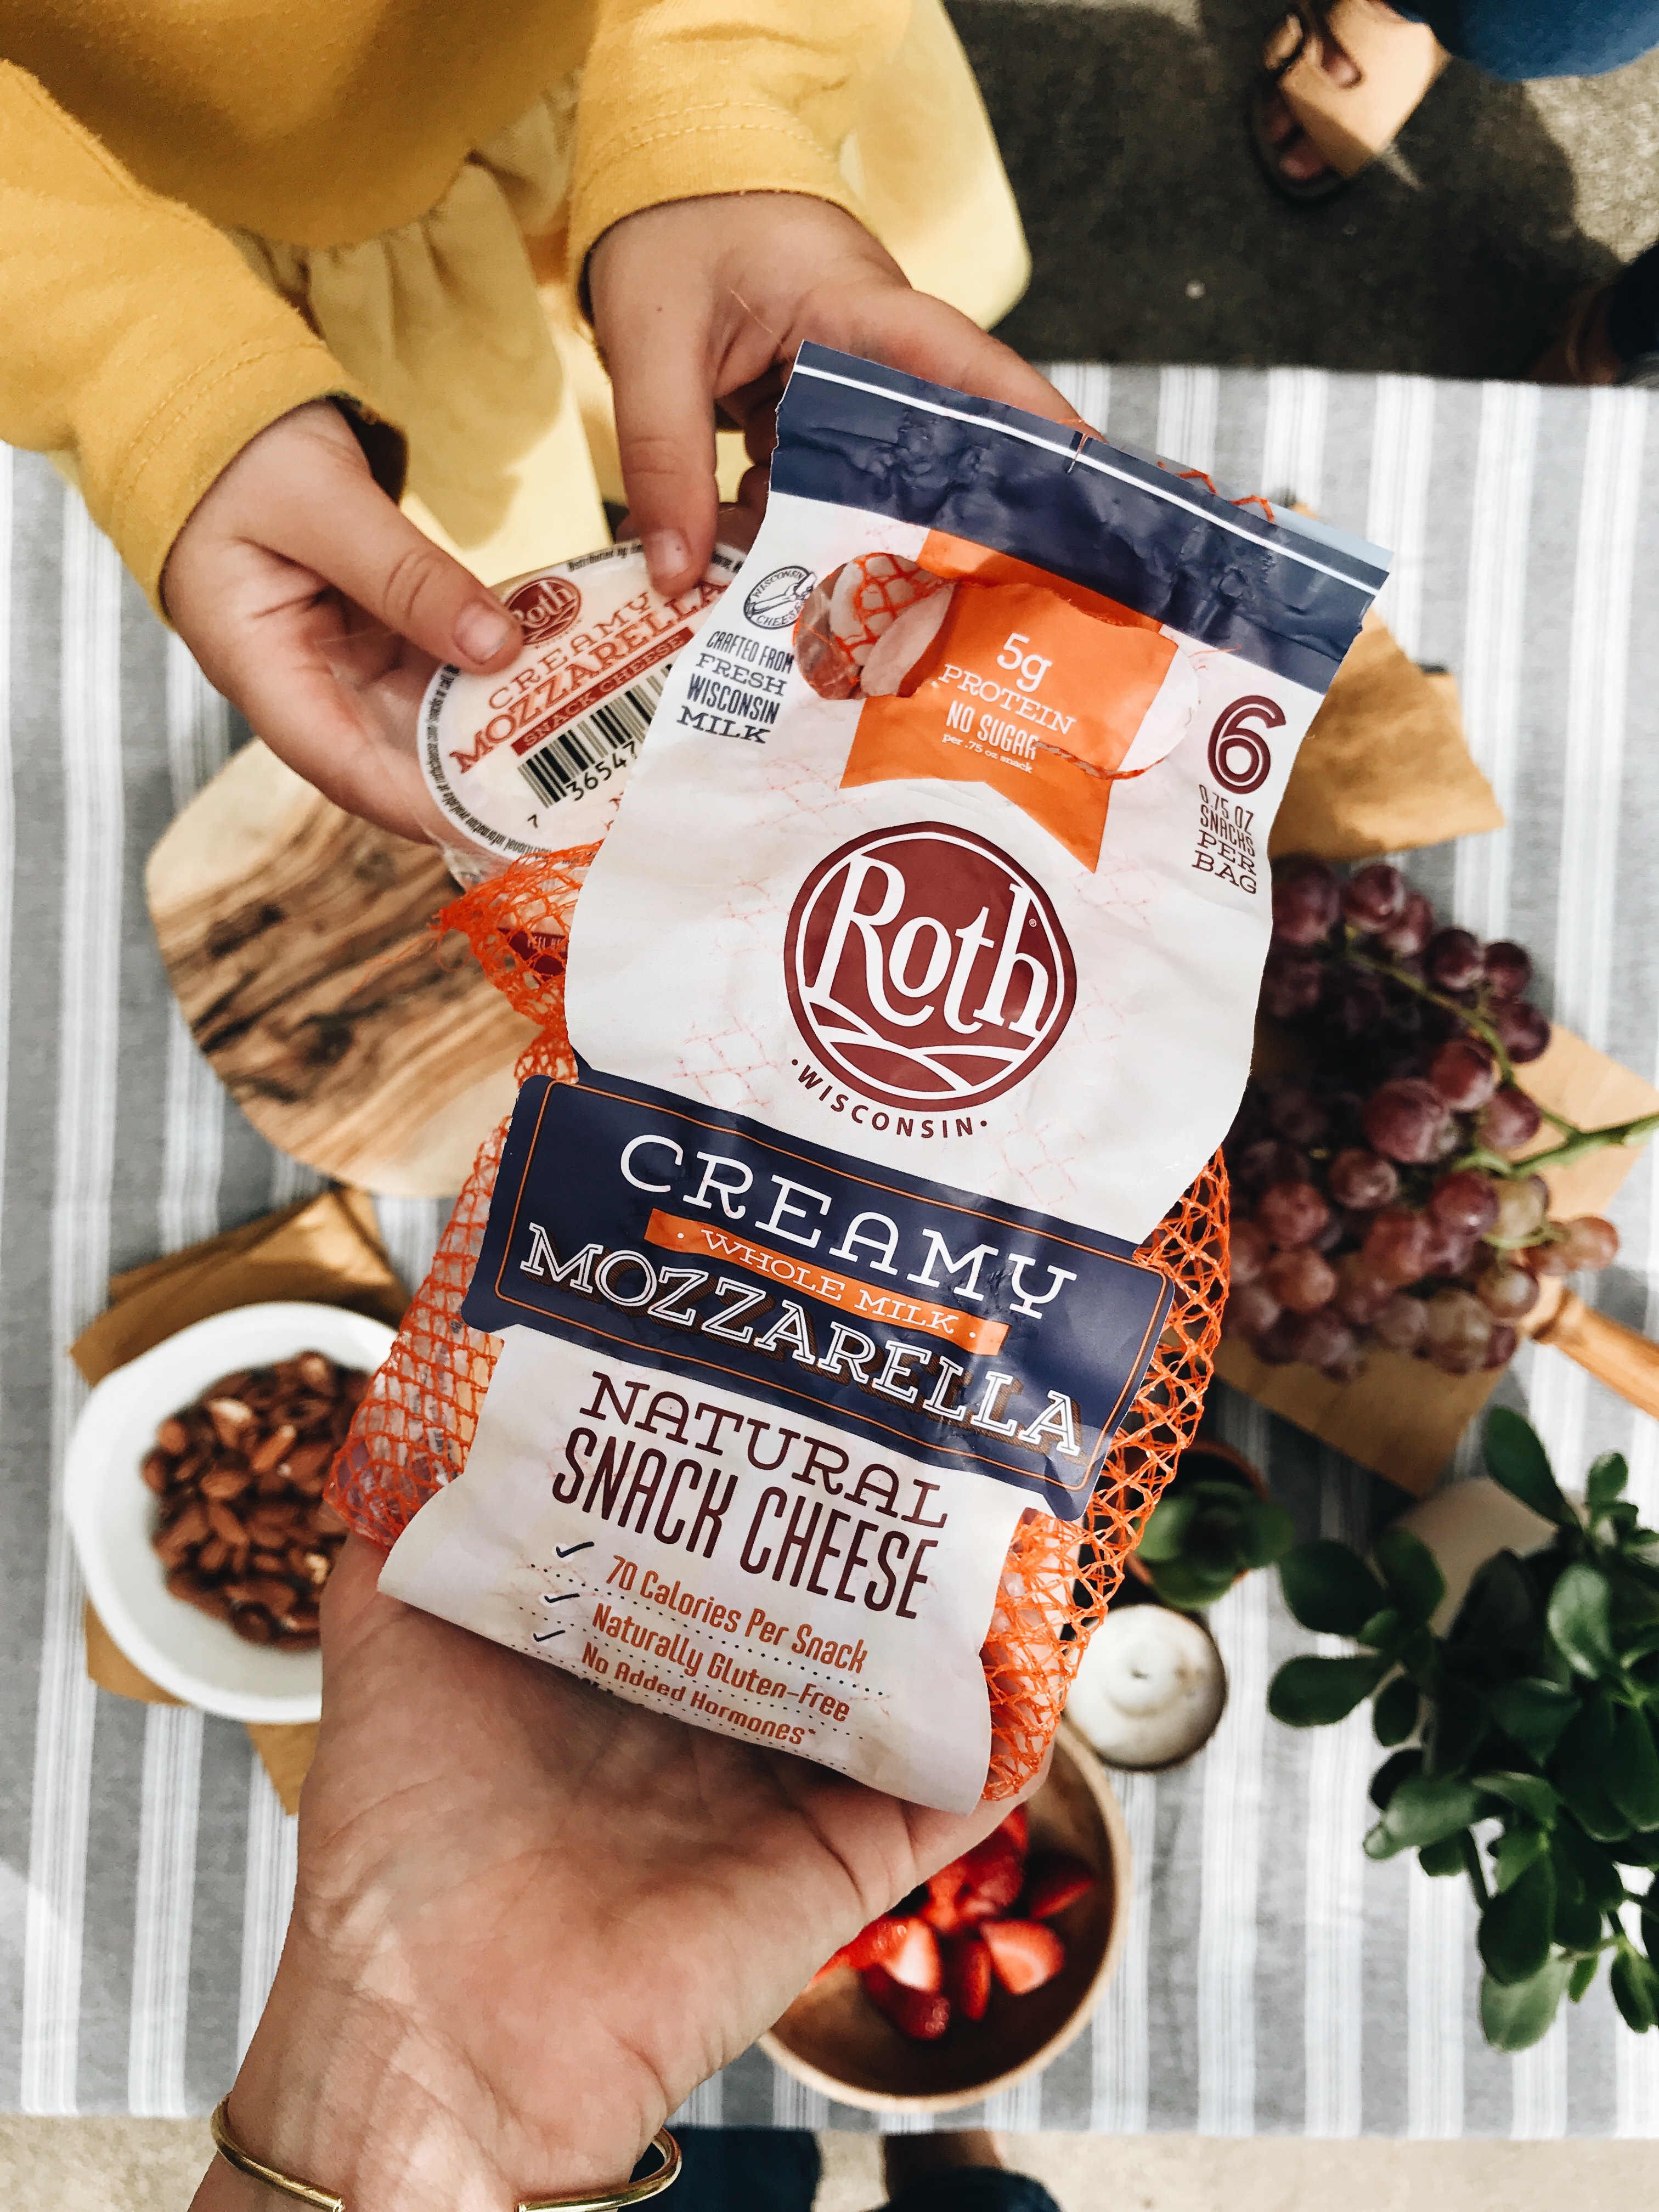 Roth's New Snack Cheeses! / Bev Cooks